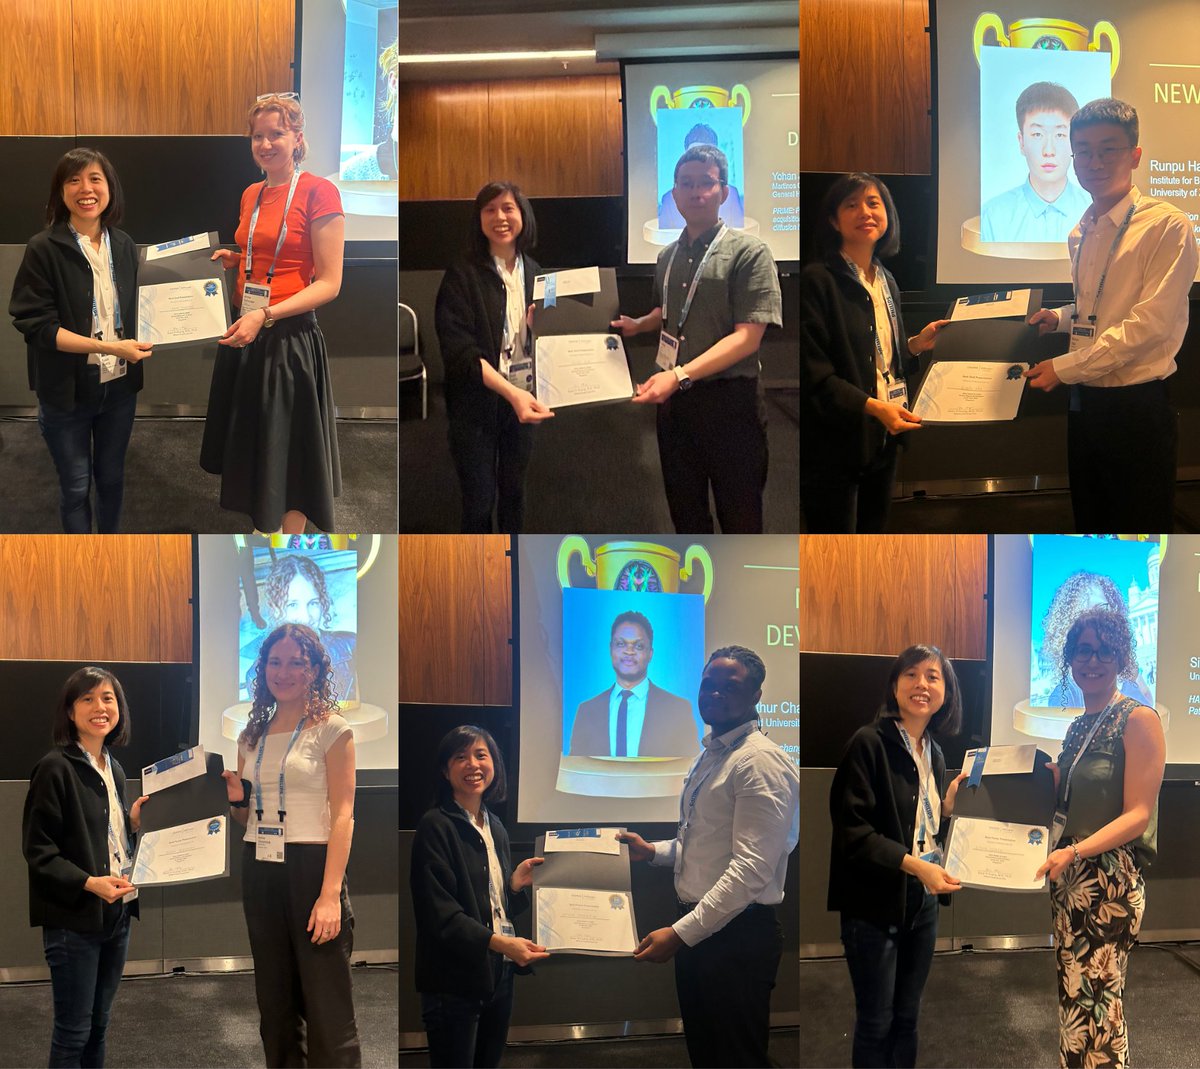 We are at the #ISMRM Annual Meeting in #Singapore and we just gave out some awards for the best trainee presentations in #Diffusion! Congrats Anna, Yohan, Runpu, Anna, Arthur, and Simona on your great work!